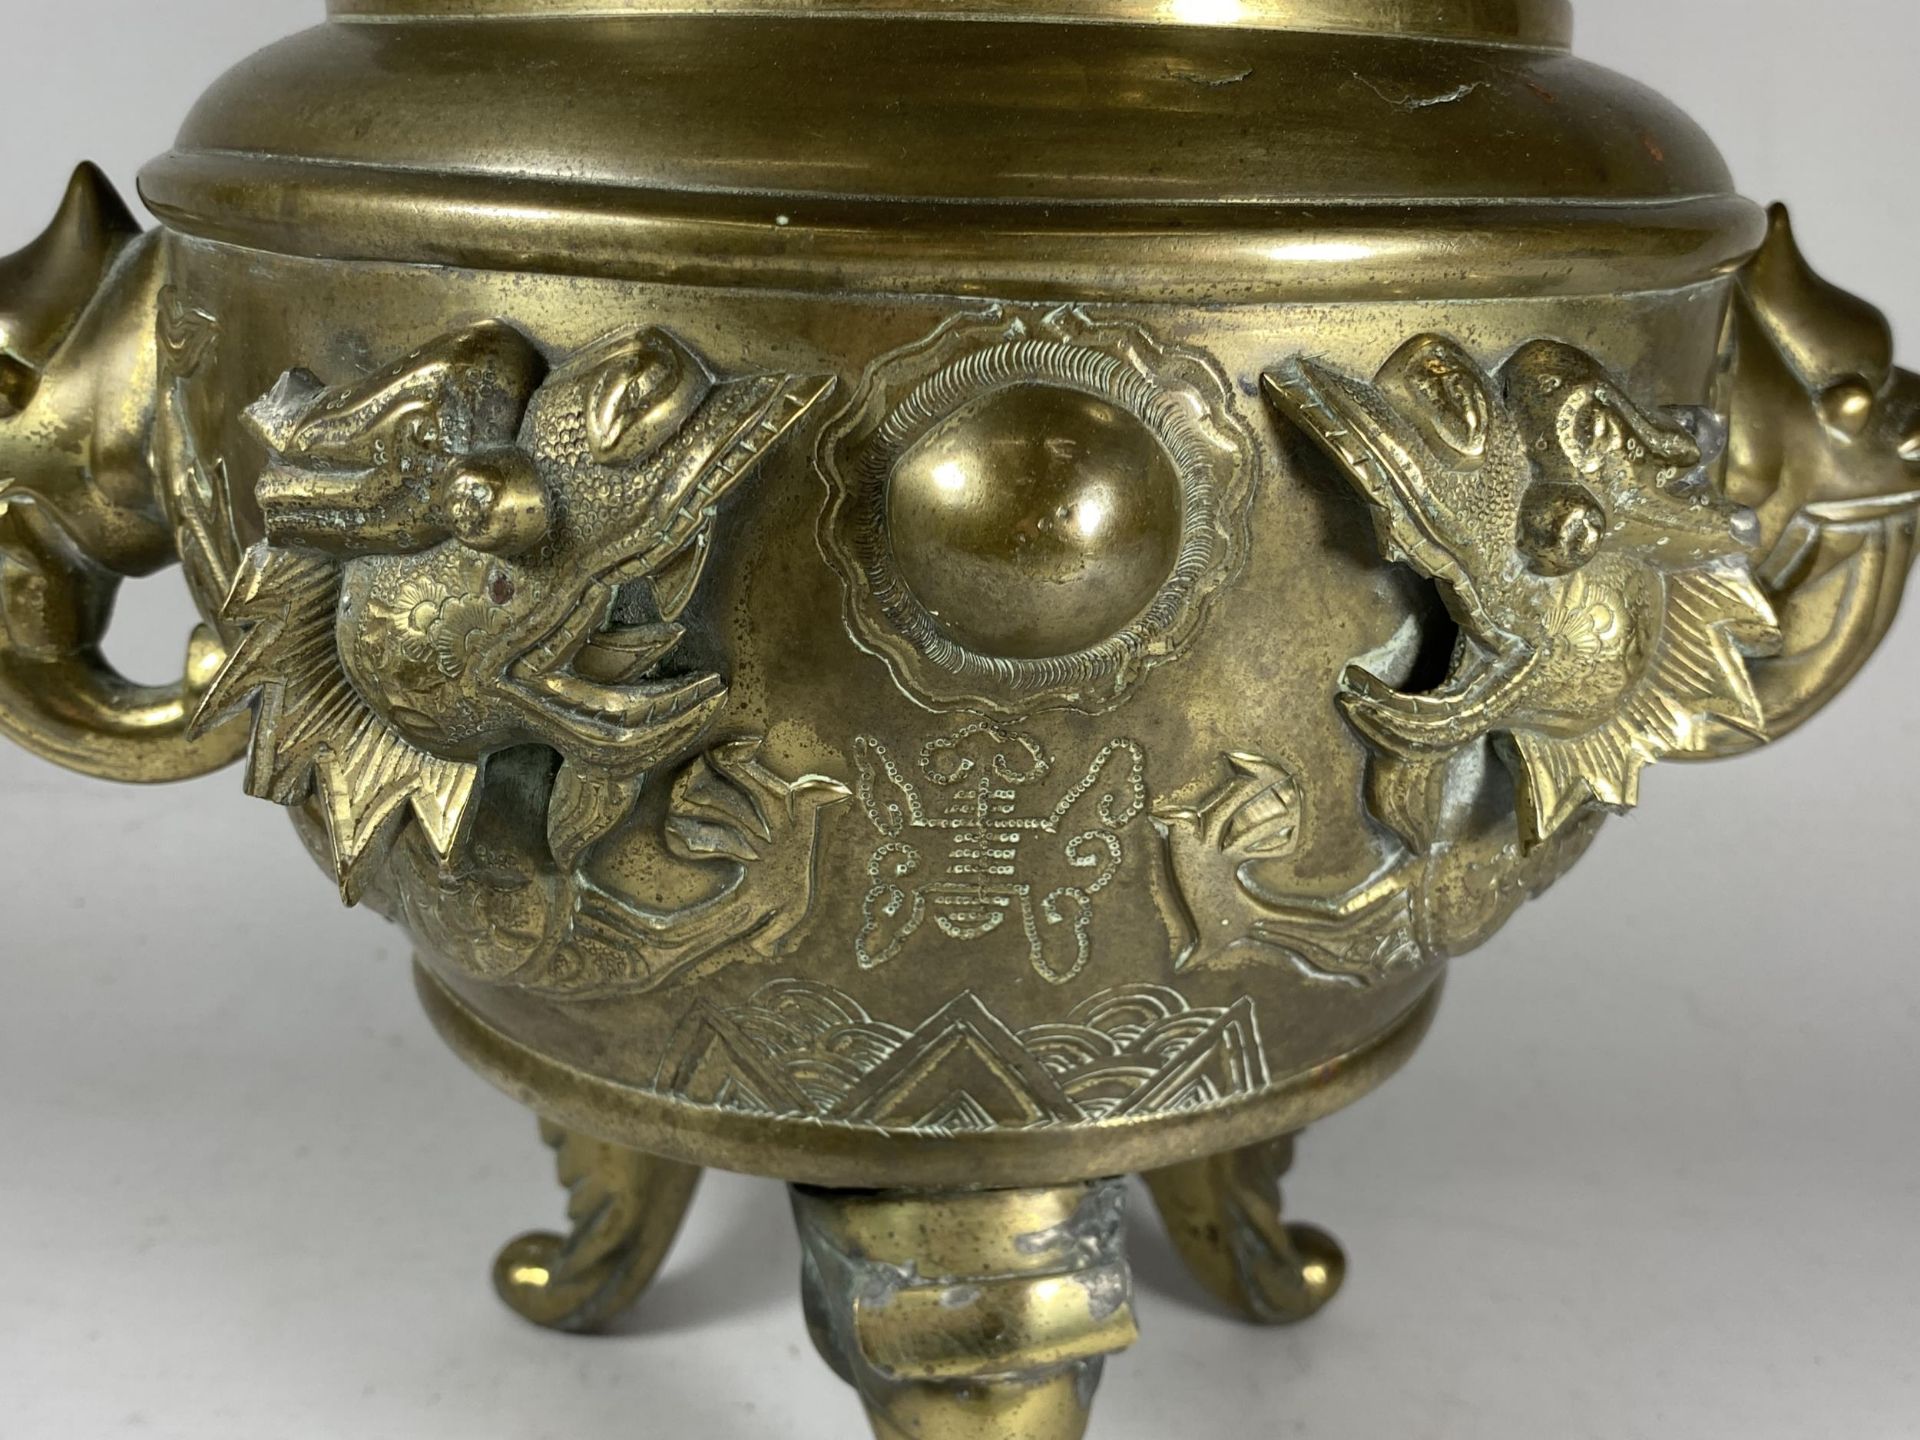 A LARGE CHINESE TWIN HANDLED BRASS LIDDED TEMPLE JAR, WITH DRAGONS CHASING THE FLAMING PEARL - Image 7 of 8